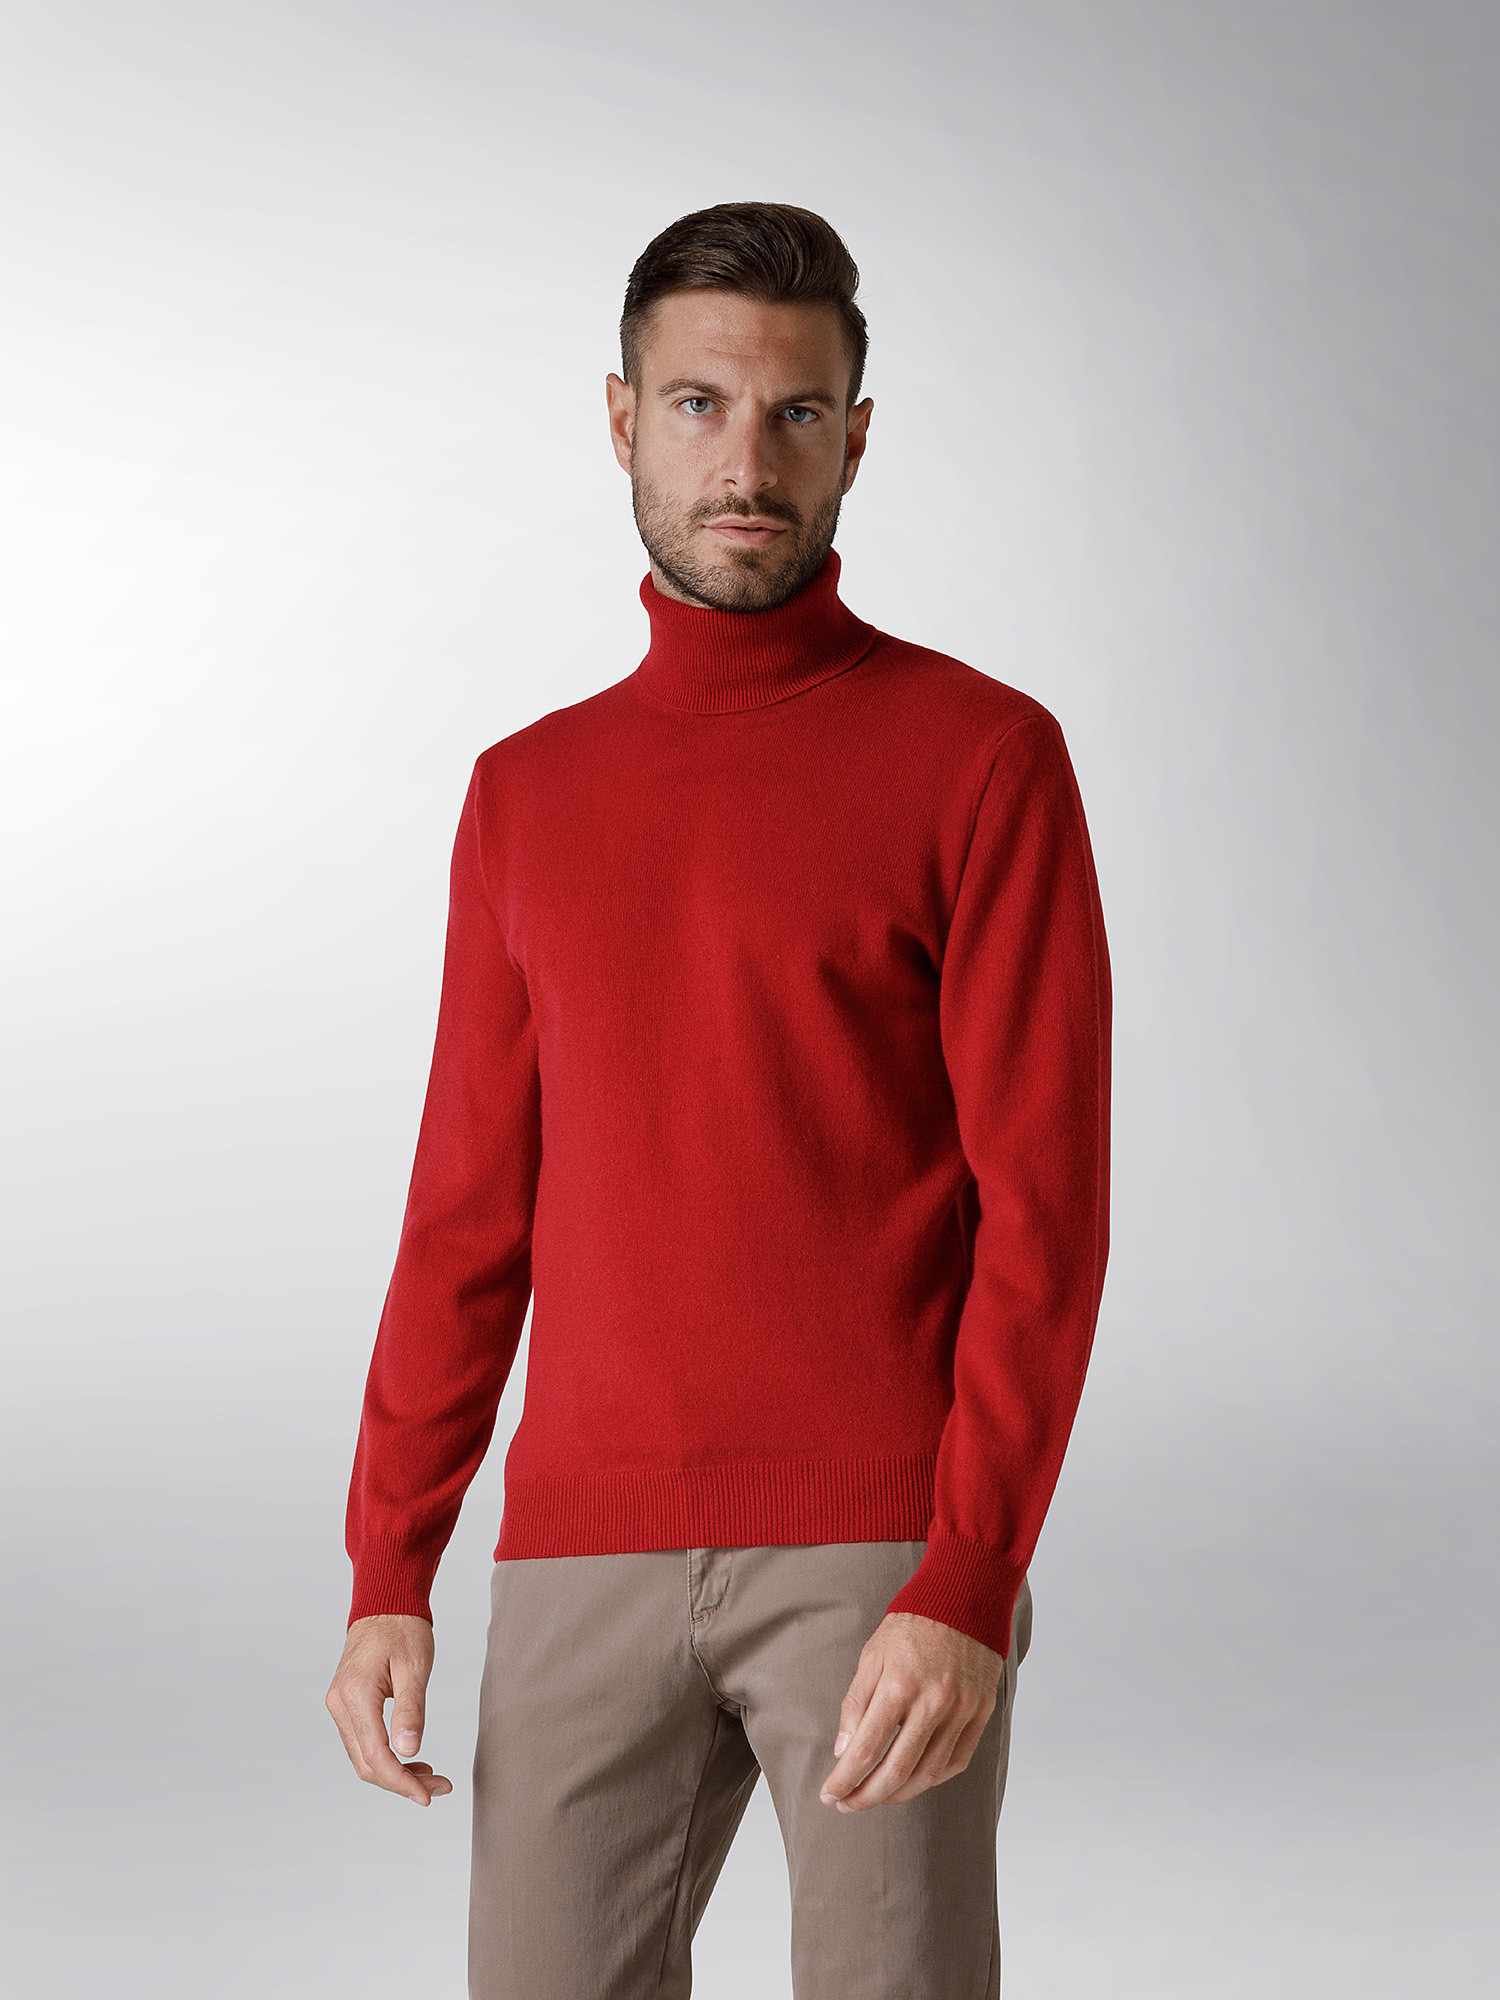 Coin Cashmere - Turtleneck in pure cashmere, Red, large image number 1